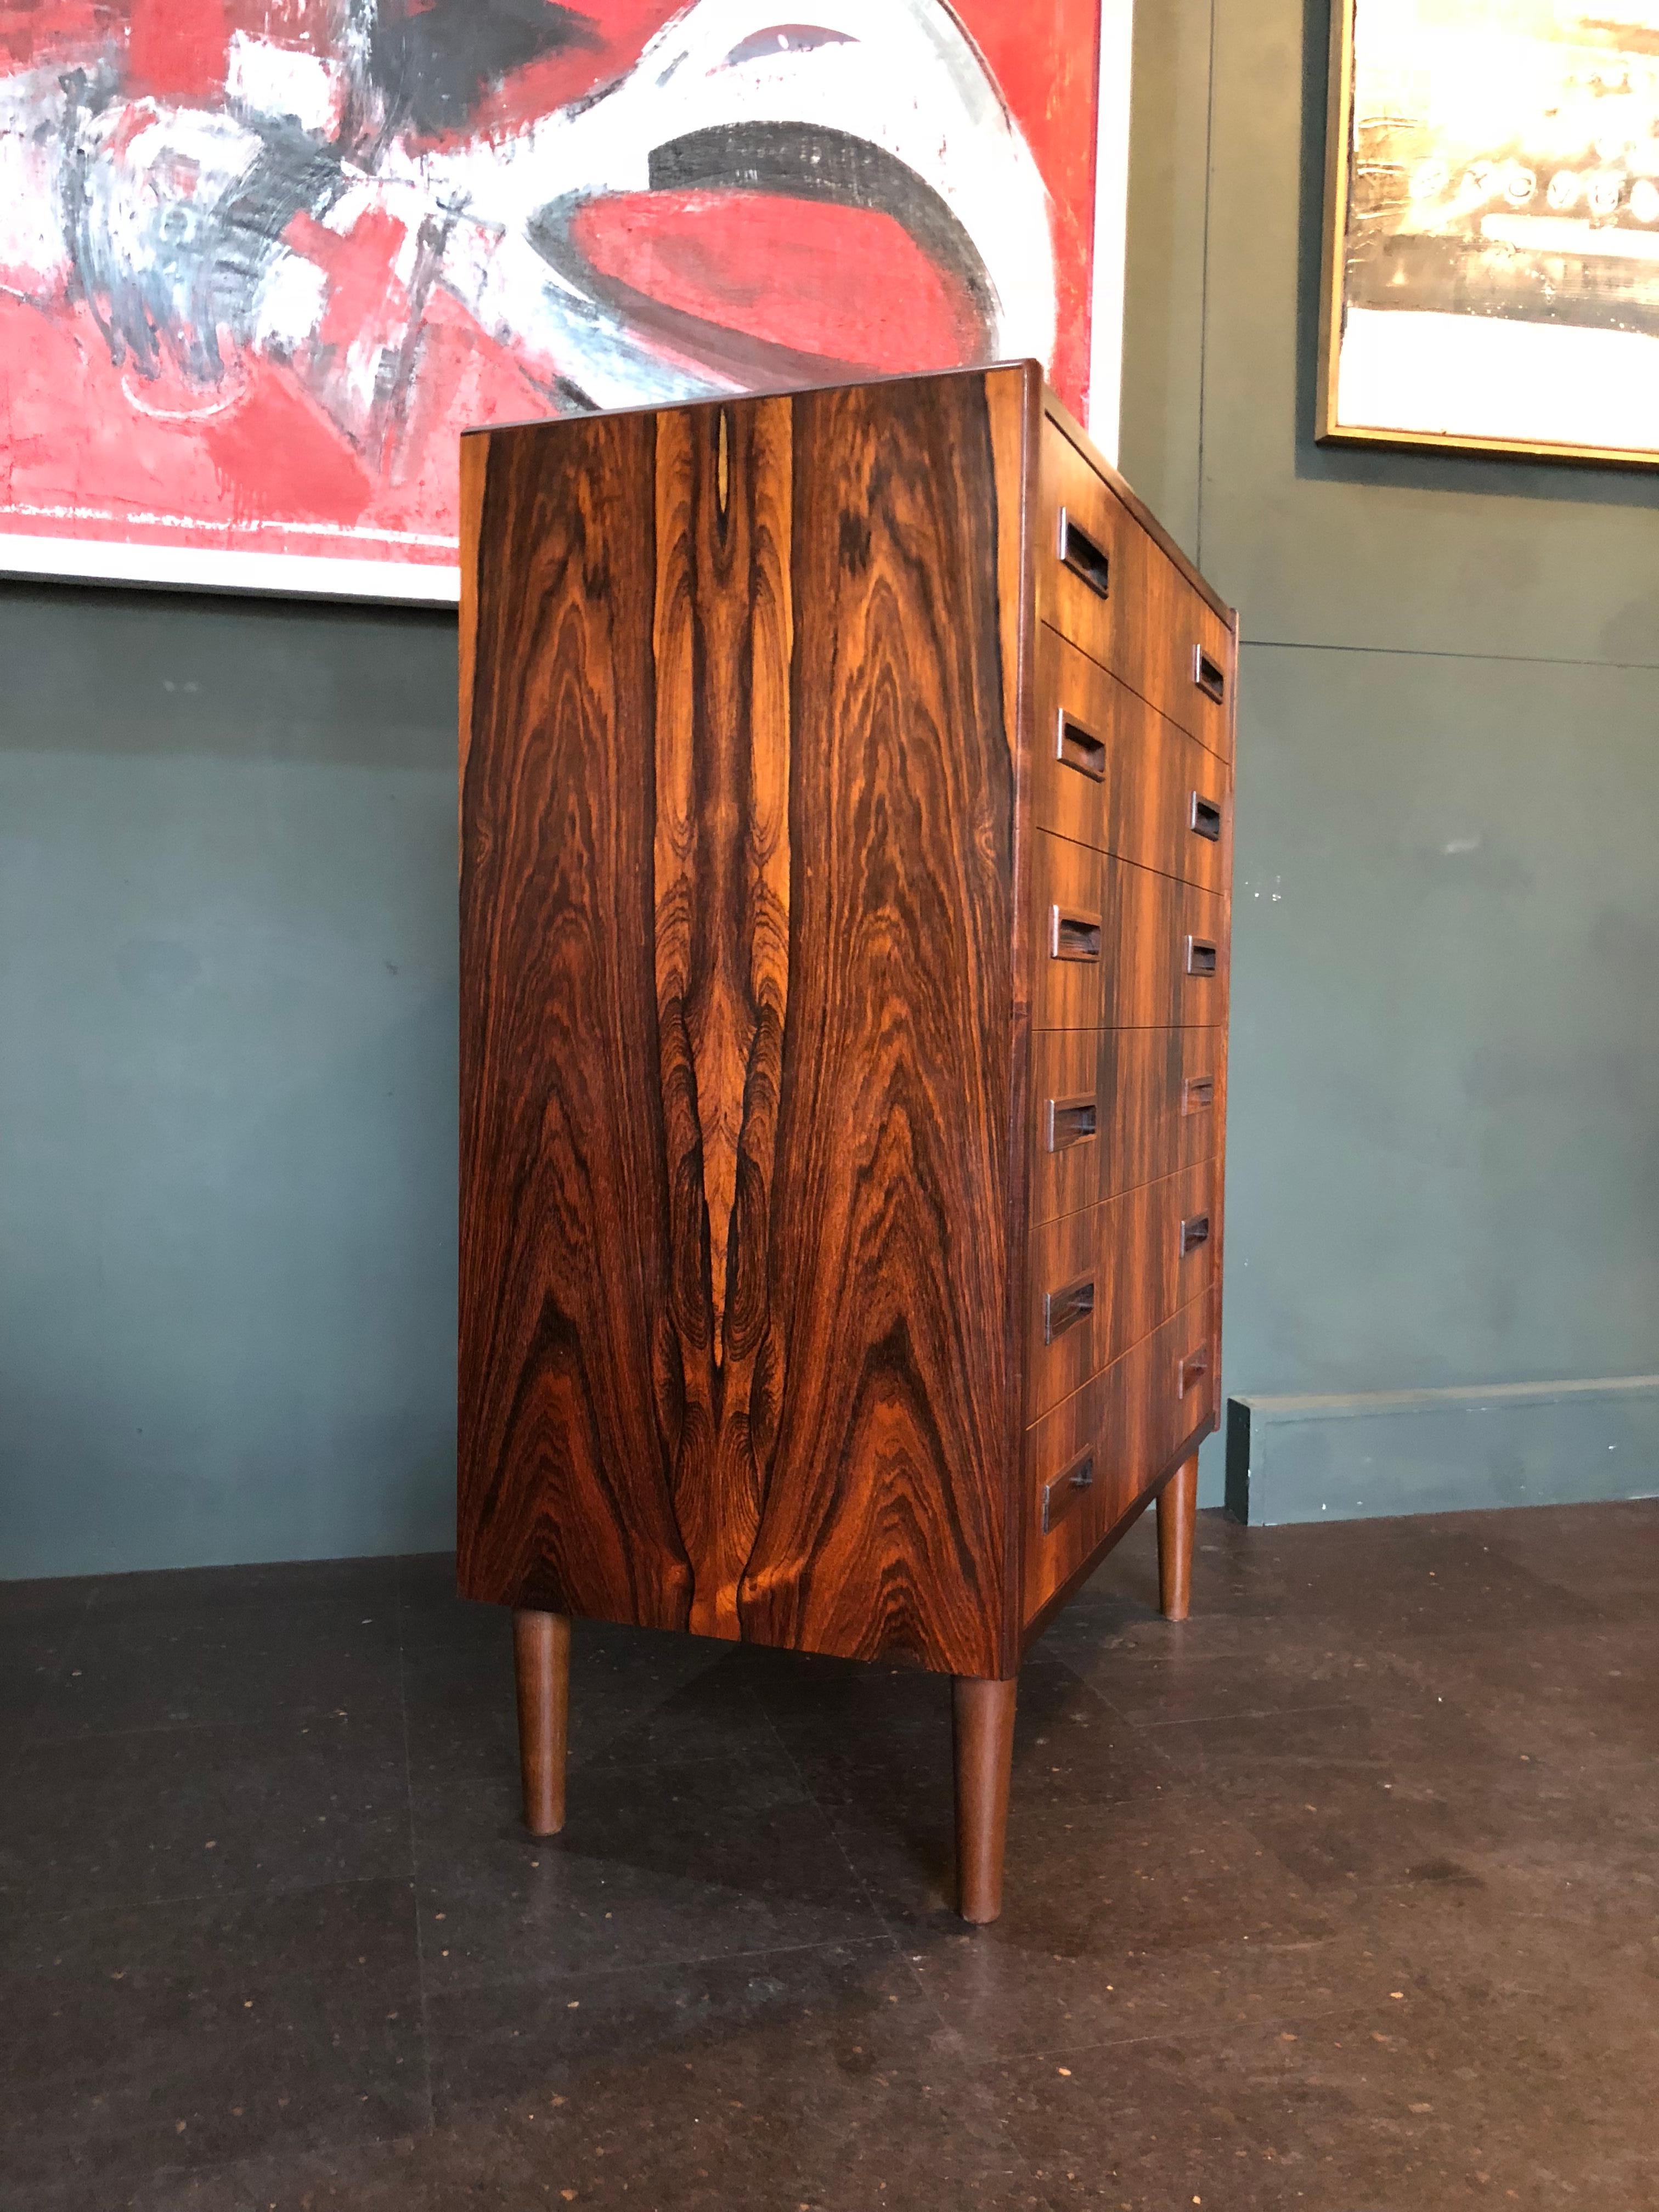 Fabulous six-drawer tallboy in rosewood. Classic Danish midcentury design from Westergaard, circa 1960.
In great condition throughout with very impressive rosewood figuring. Re-oiled surface.